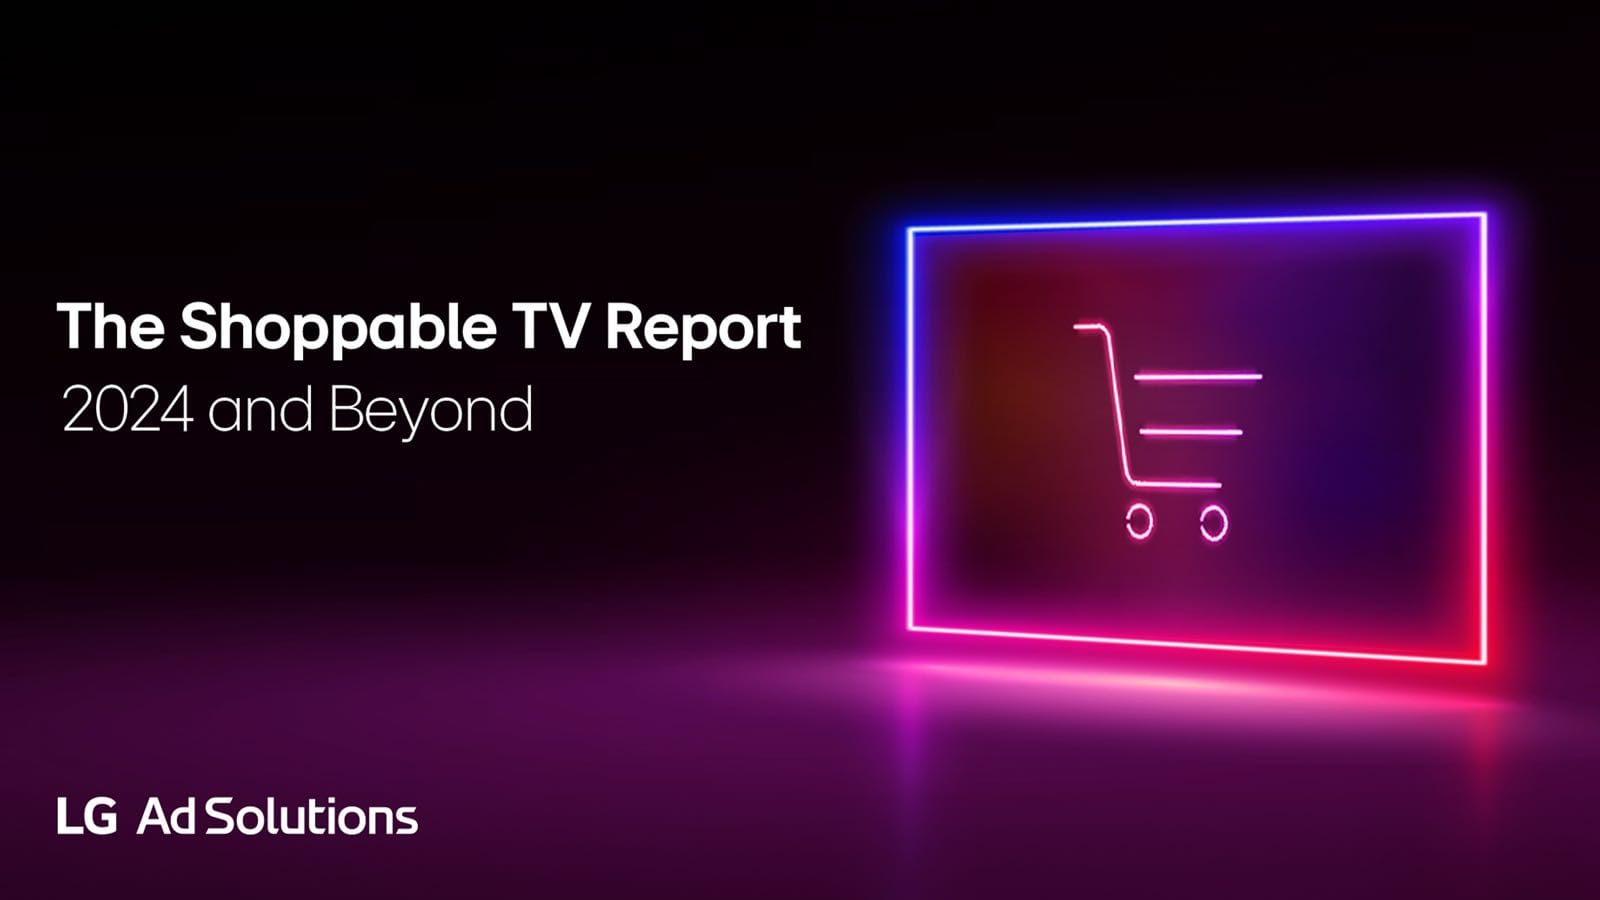 The Shoppable TV Report